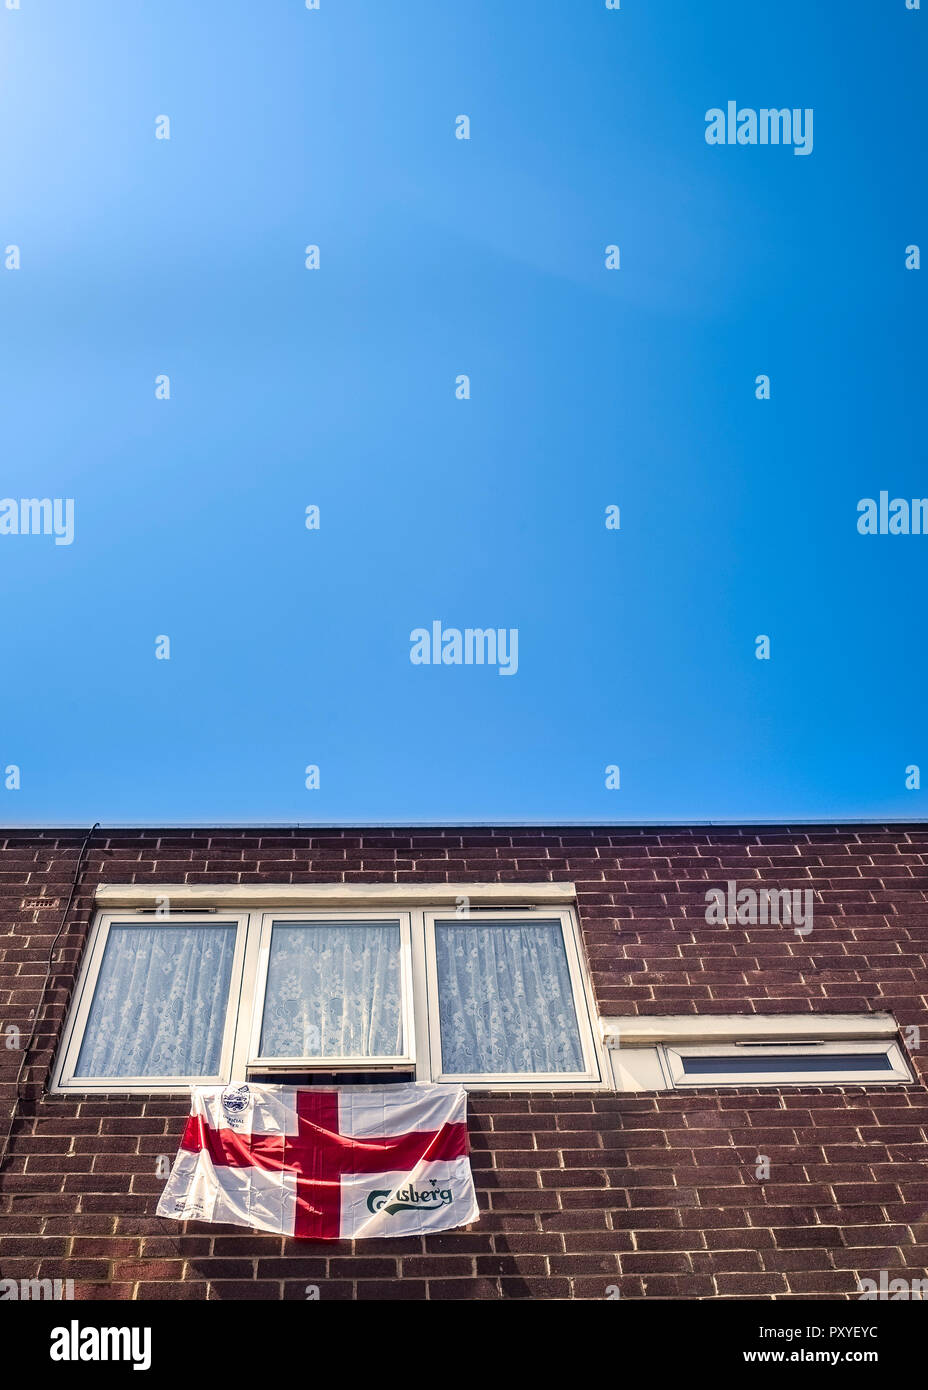 flag of St George hanging from window during football world cup Stock Photo